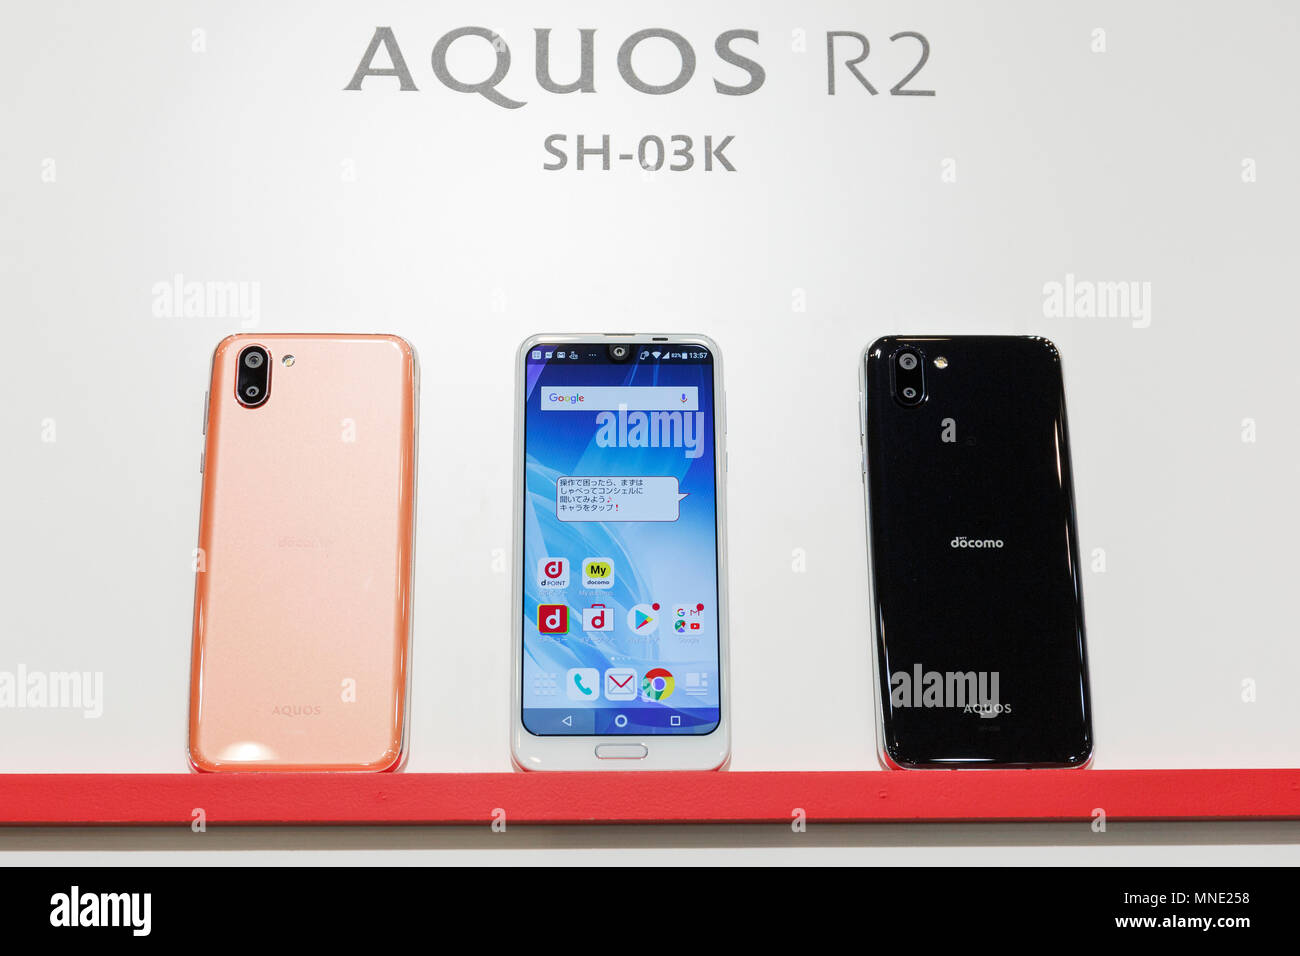 DOMOCO's new smartphone AQUOS R2 (SH-03K) on display during a news conference for the launch of company's 2018 summer lineup of 11 mobile devices on May 16, 2018, Tokyo, Japan. Kazuhiro Yoshizawa President and CEO presented DOCOMO's new mobile devices for this summer, and its' own Artificial Intelligence (AI) personal assistant ''my daiz'' which will be available from May 30. DOCOMO also launched a new financial advice service ''THEO '' available from May 16th. Credit: Rodrigo Reyes Marin/AFLO/Alamy Live News Stock Photo